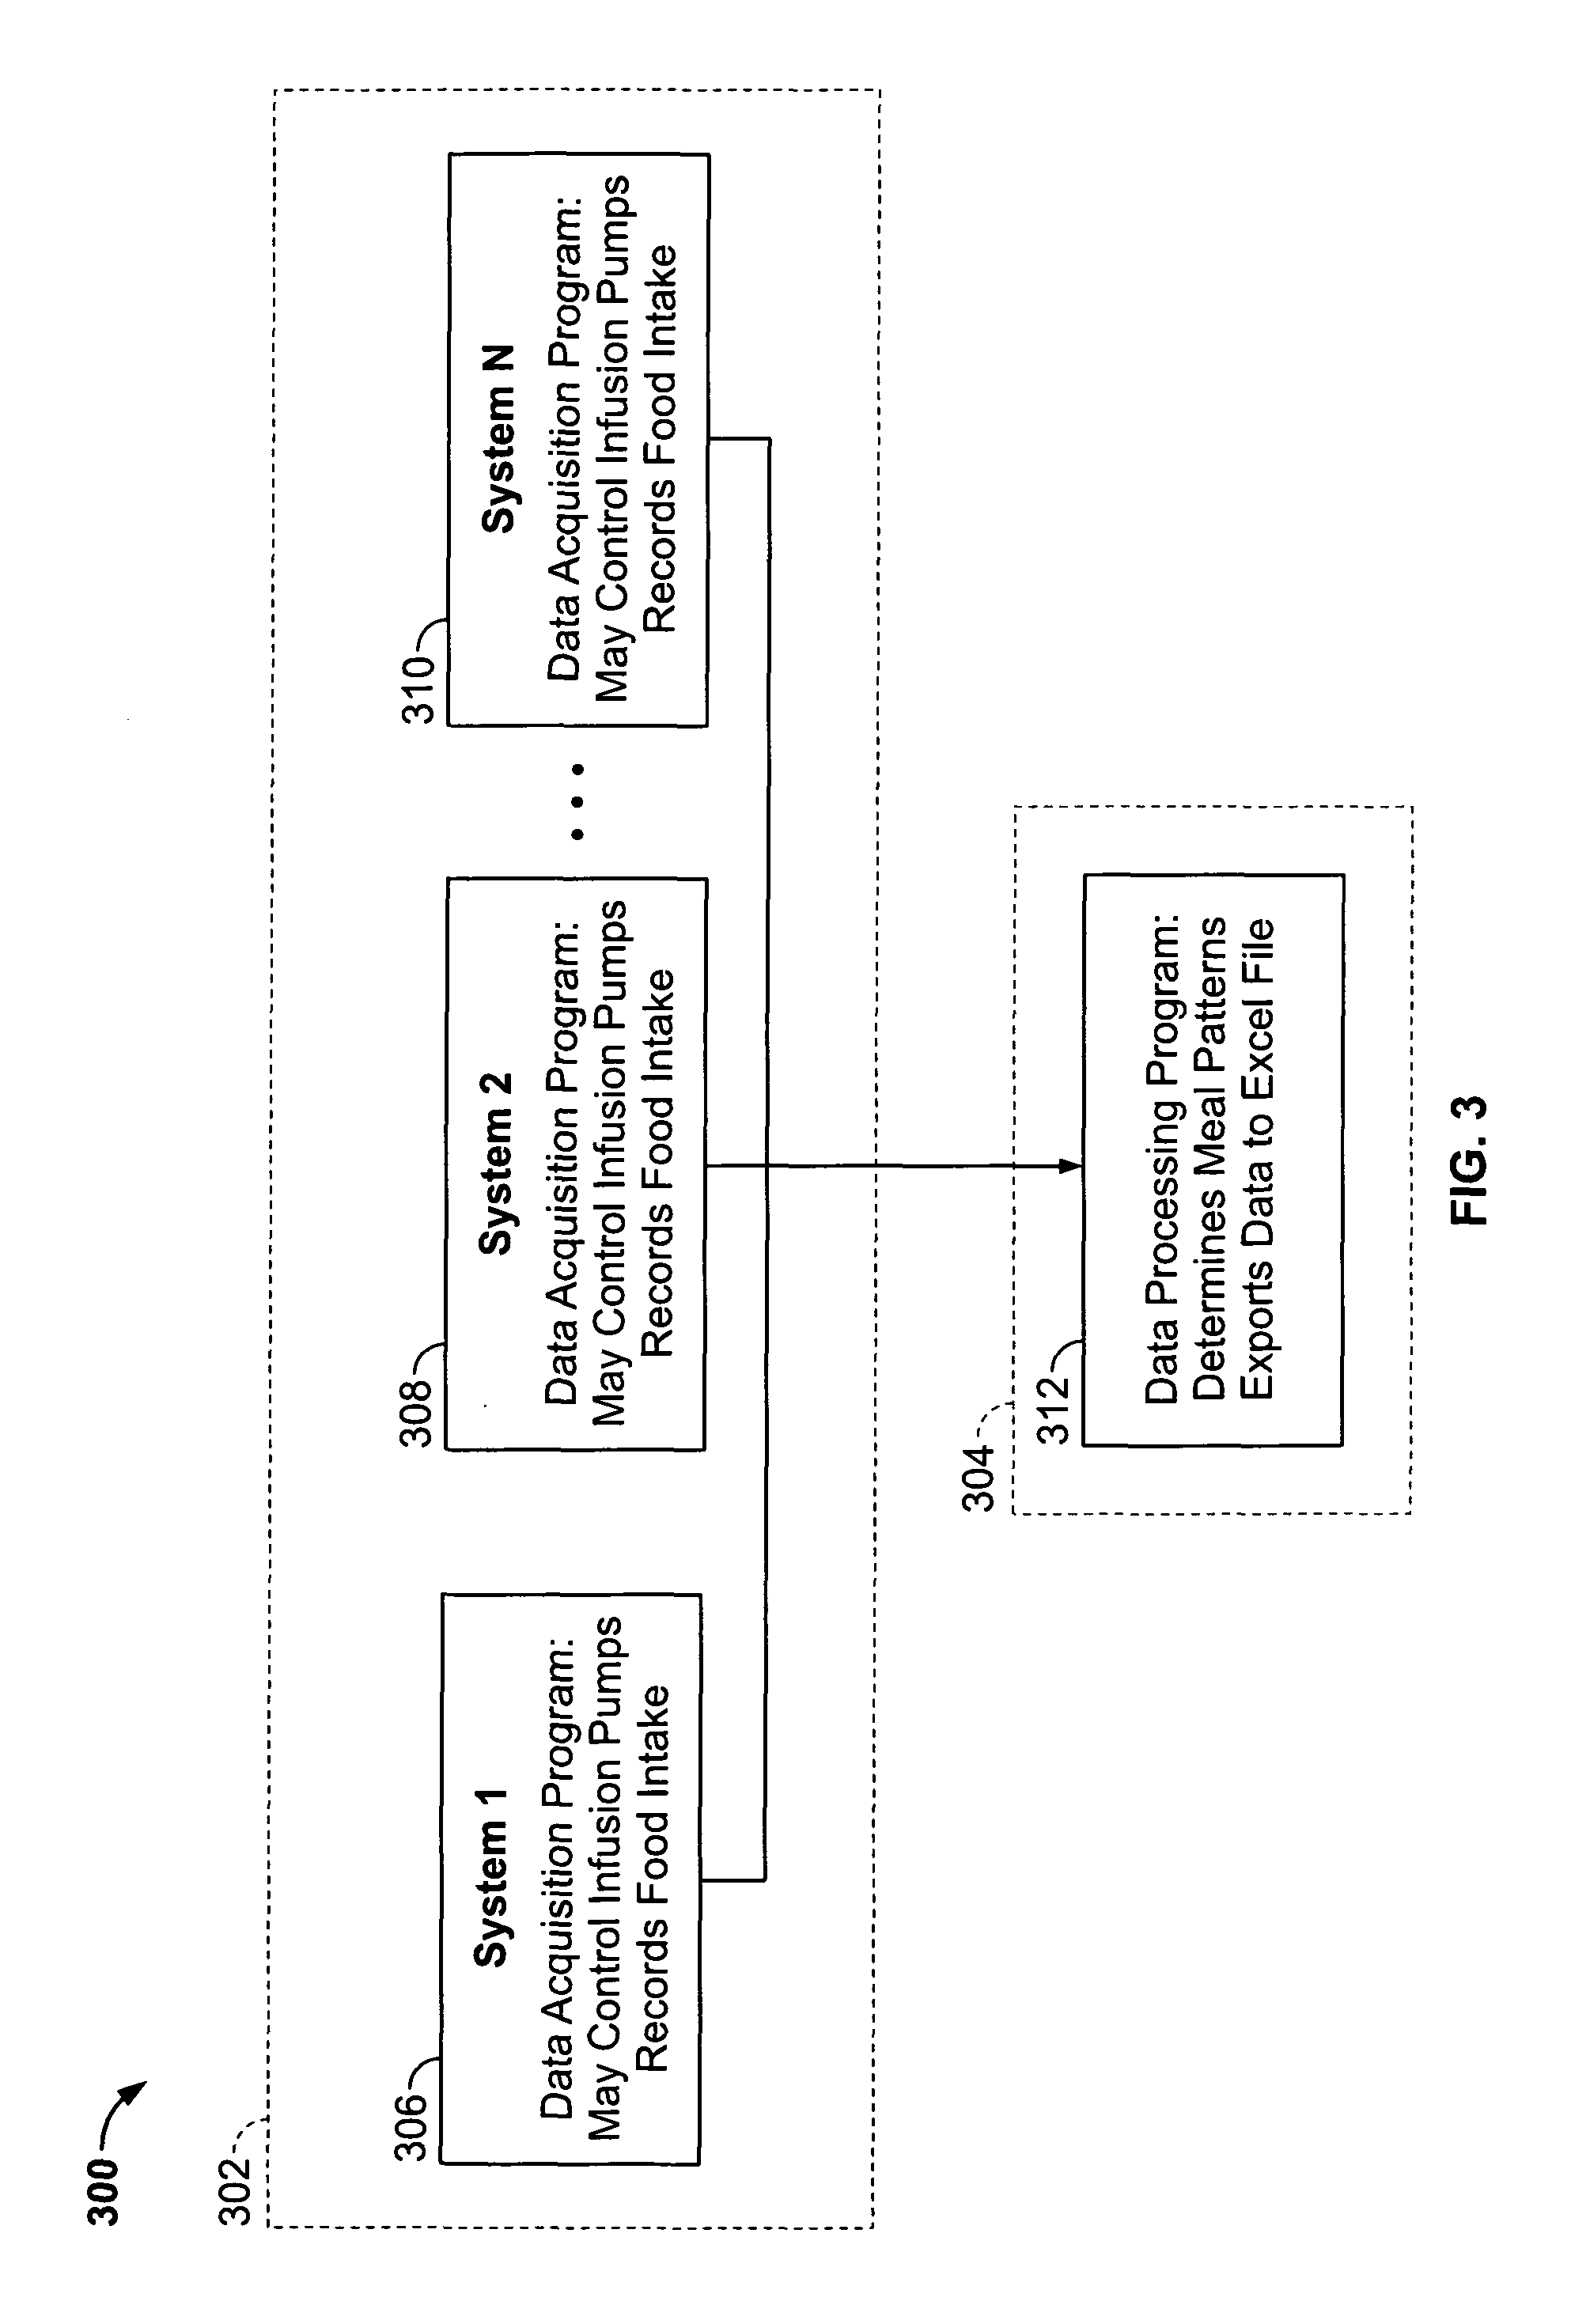 System and methods for evaluating efficacy of appetite-affecting drugs